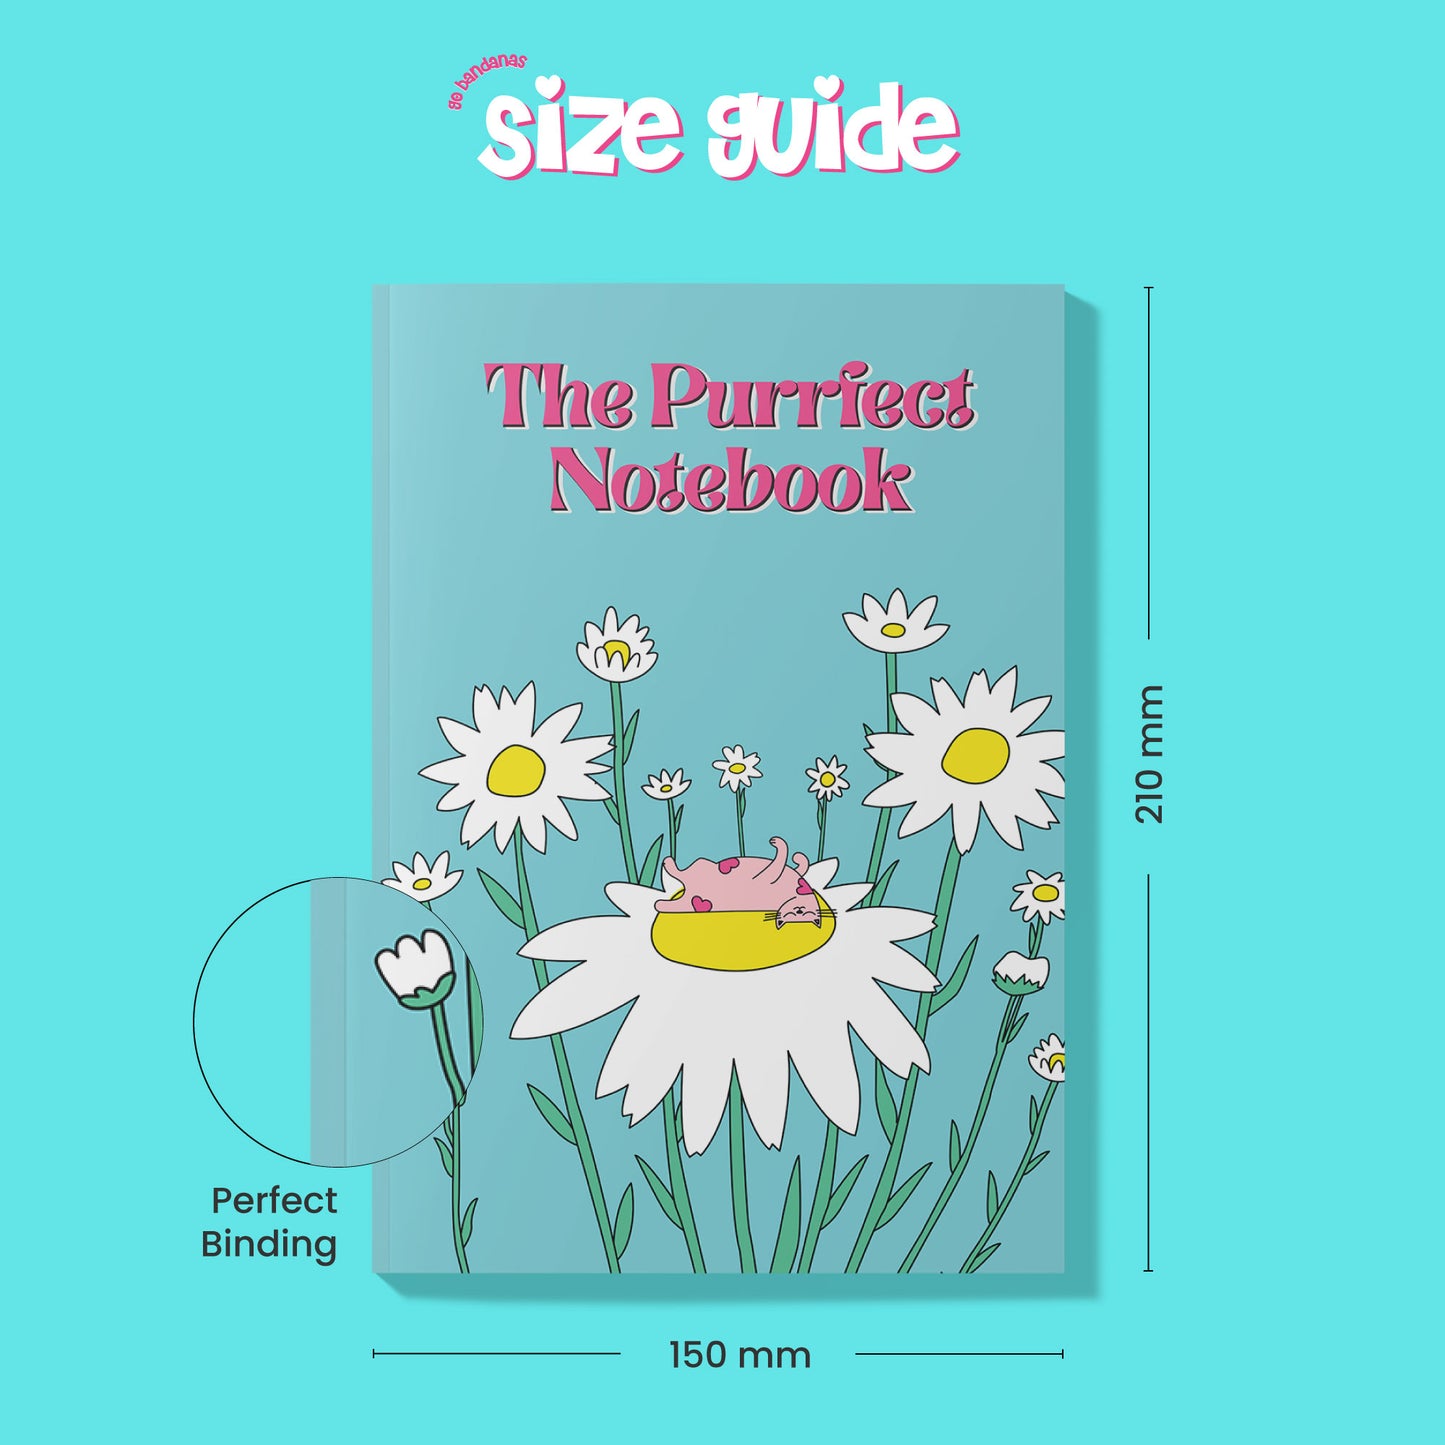 'The Purrfect Notebook' A5-160 Pages 80 GSM Unruled | Digitally Printed by Go Bandanas | Perfect for Writing, Drawing & Doodling